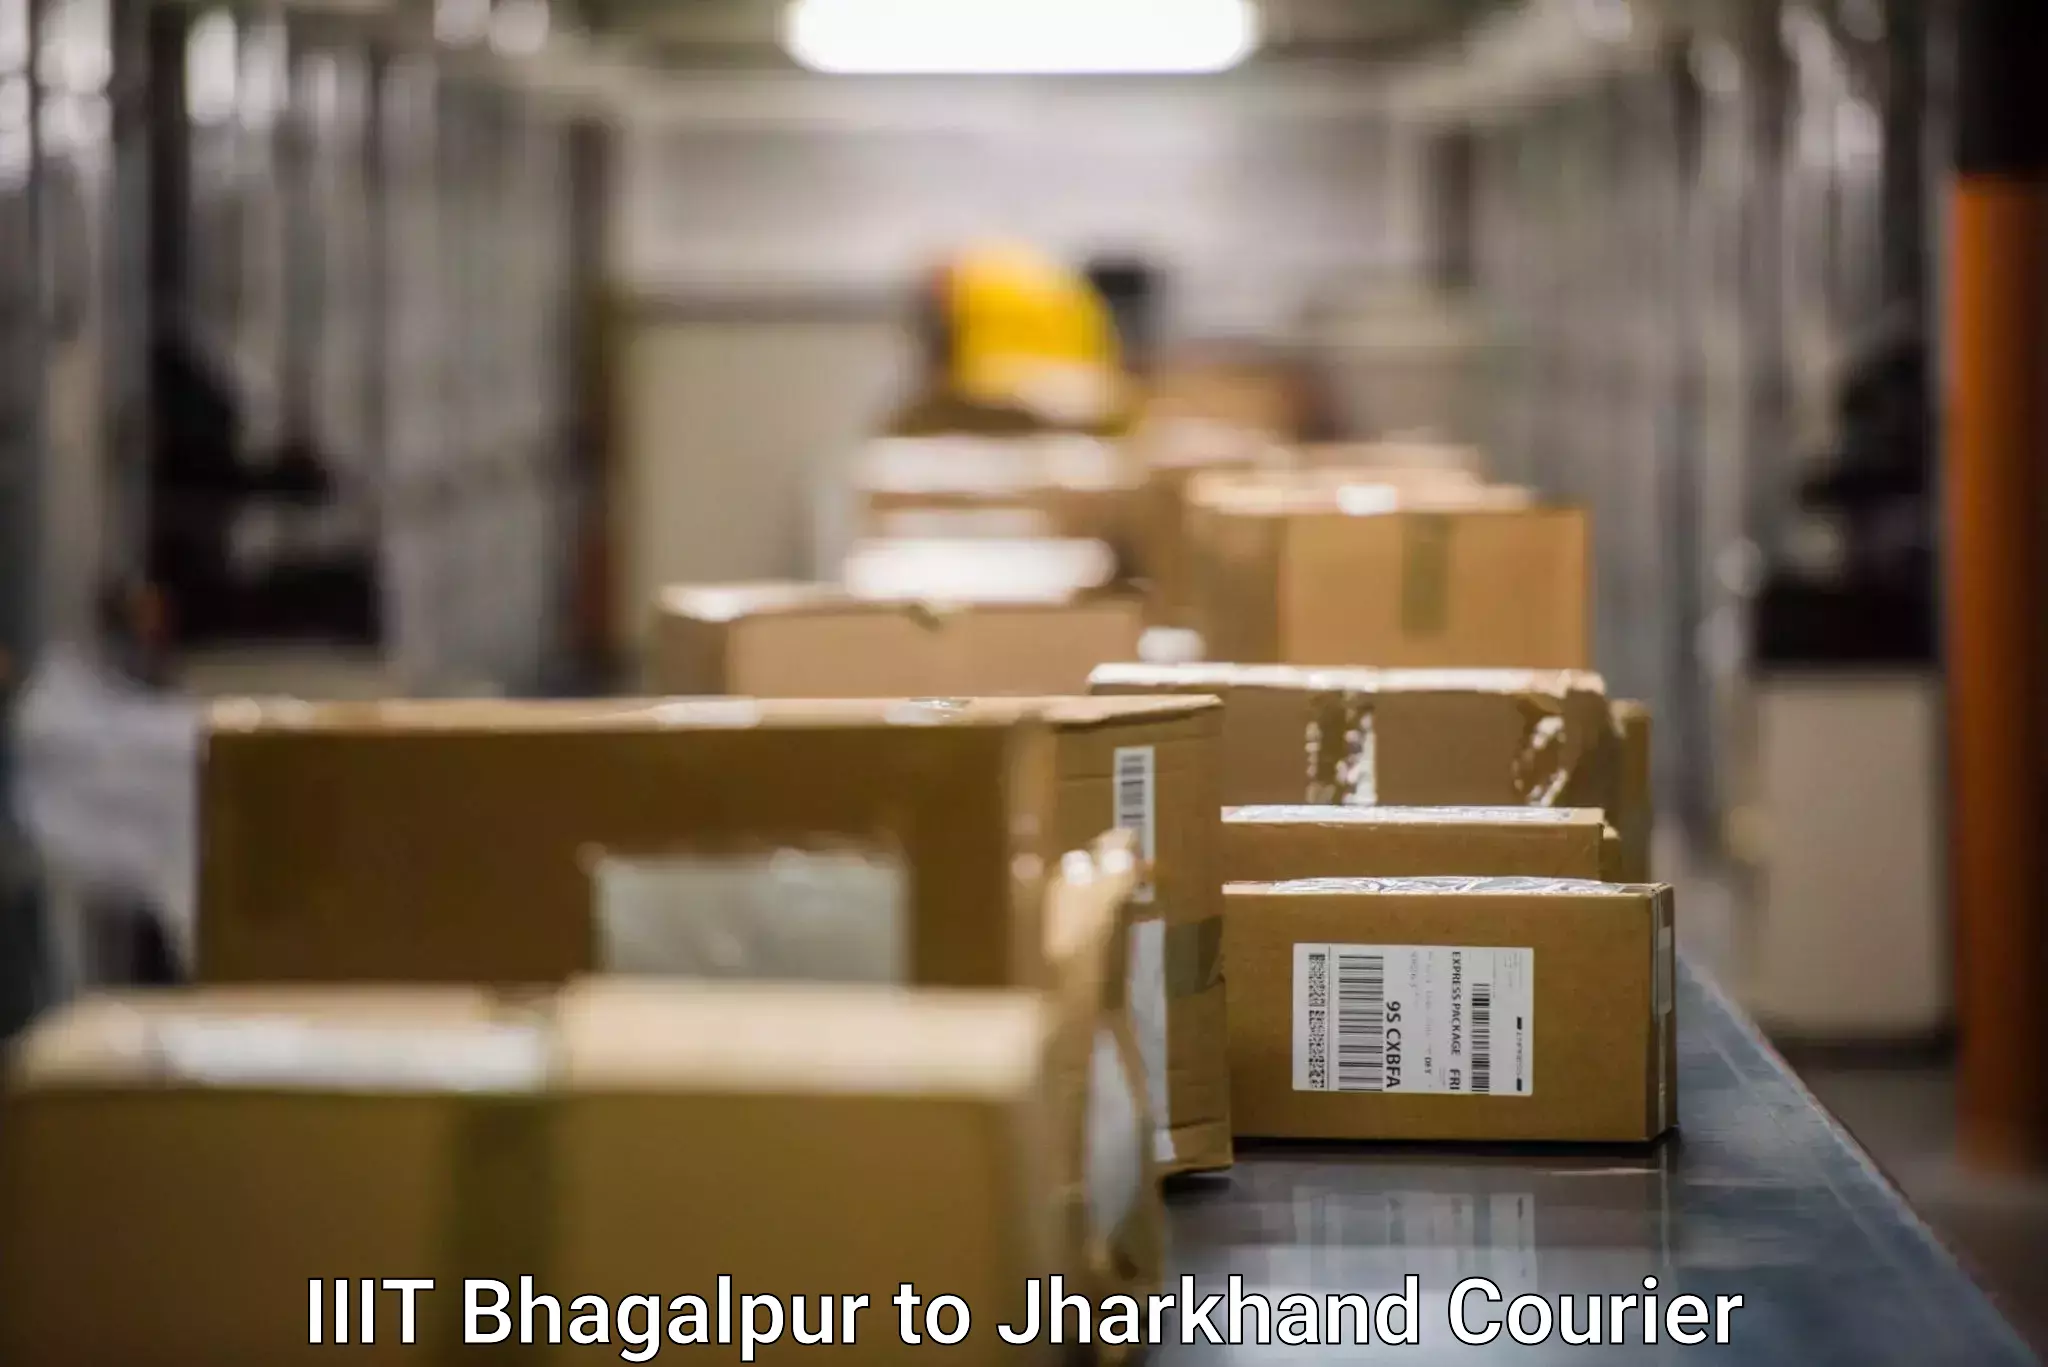 On-call courier service IIIT Bhagalpur to Jharkhand